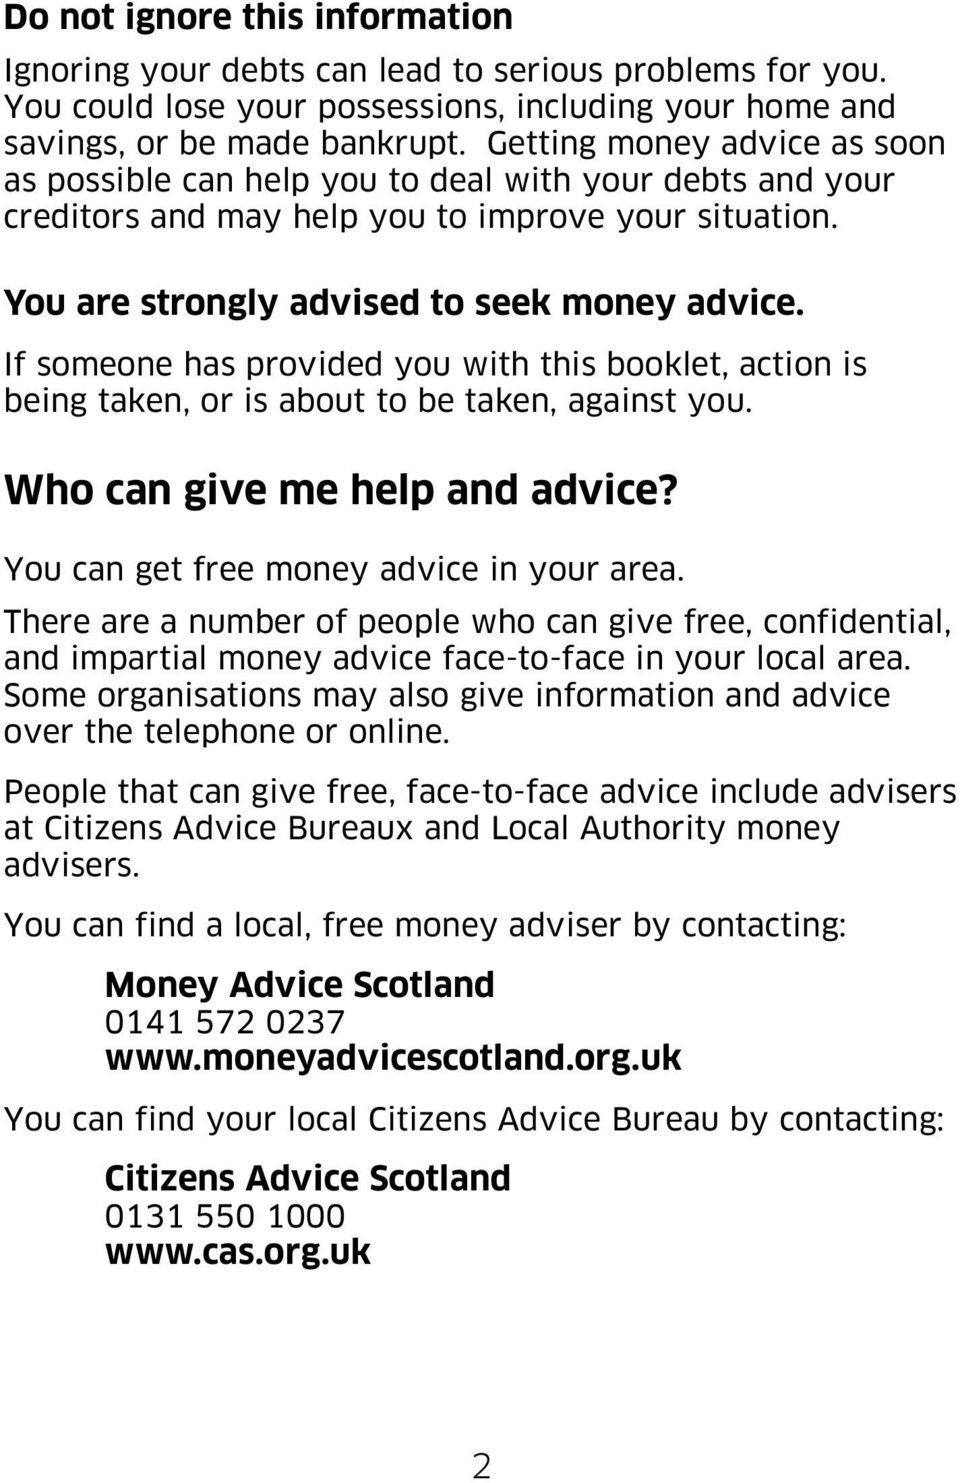 If someone has provided you with this booklet, action is being taken, or is about to be taken, against you. Who can give me help and advice? You can get free money advice in your area.